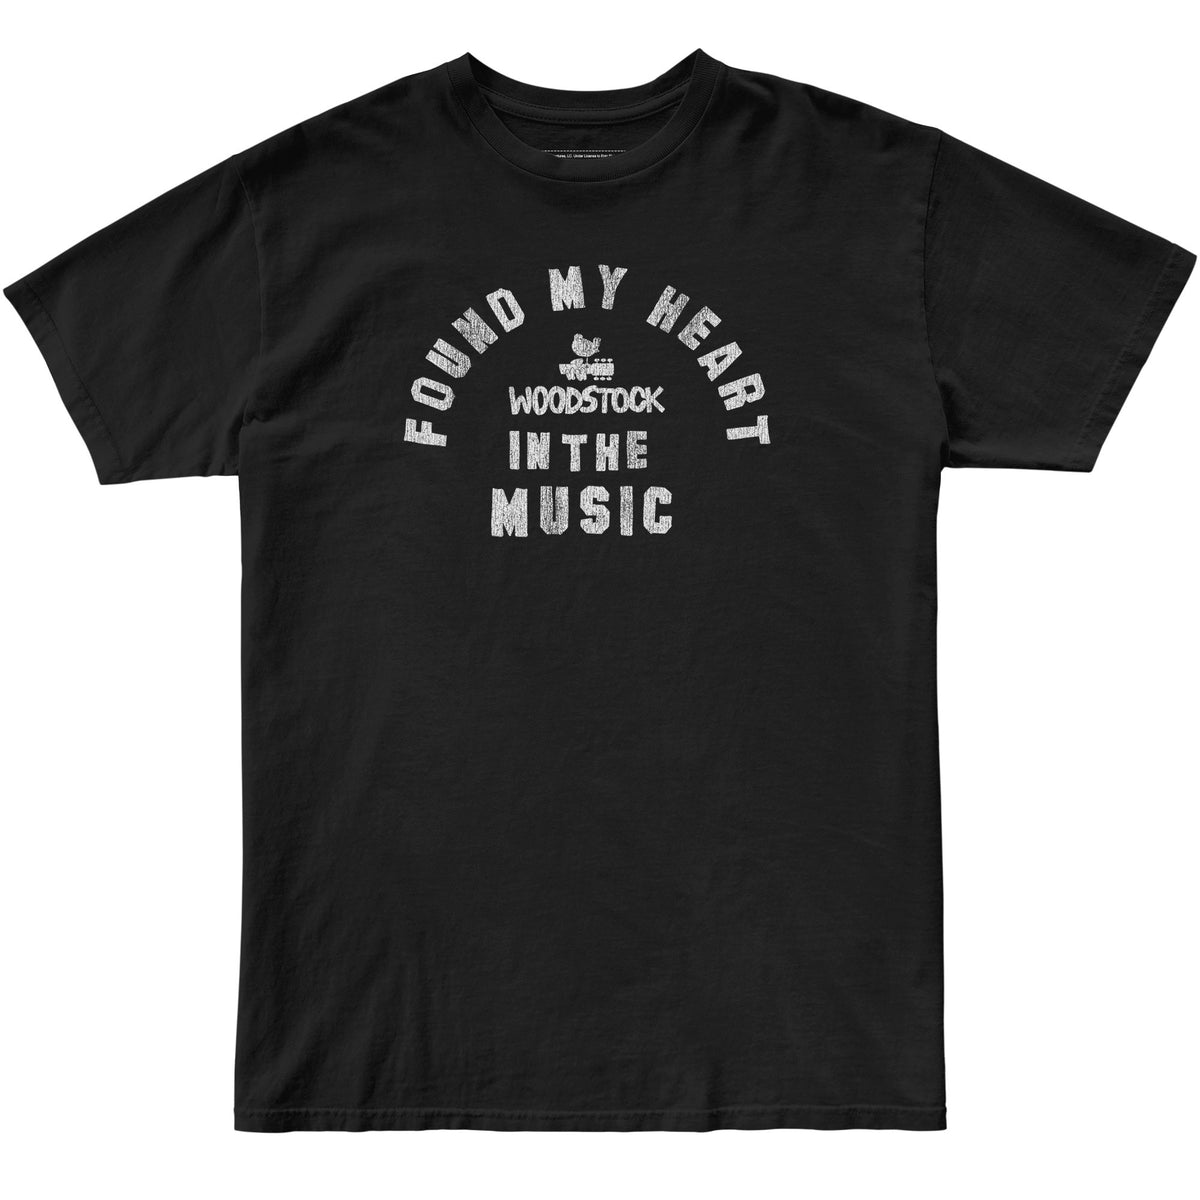 Woodstock In The Music 100% Cotton Tee